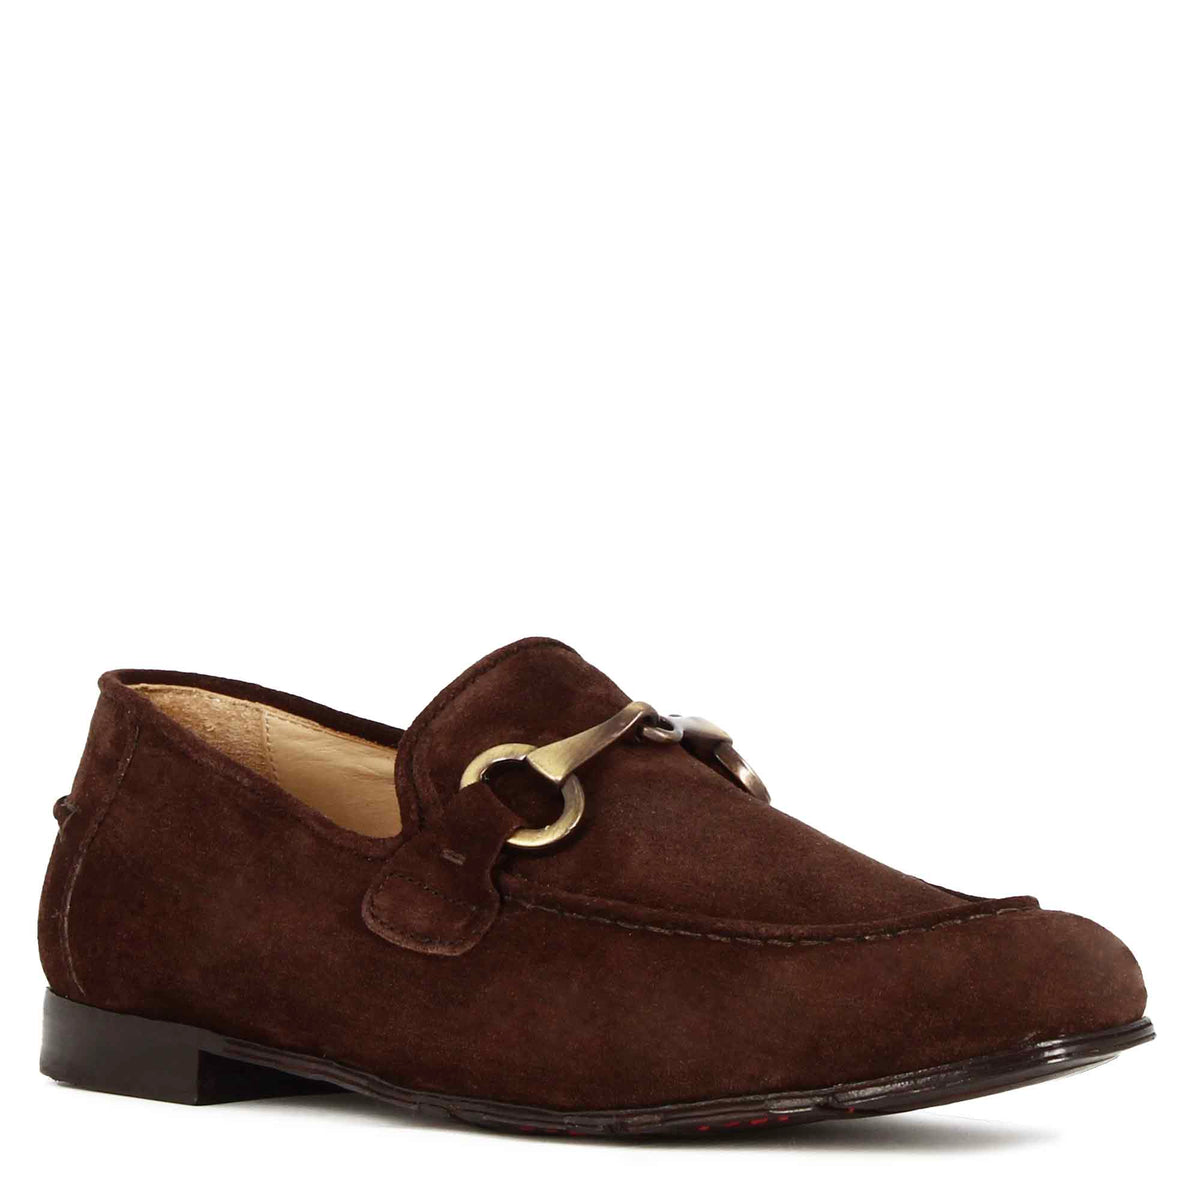 Men's moccasin in dark brown suede with gold-coloured clamp